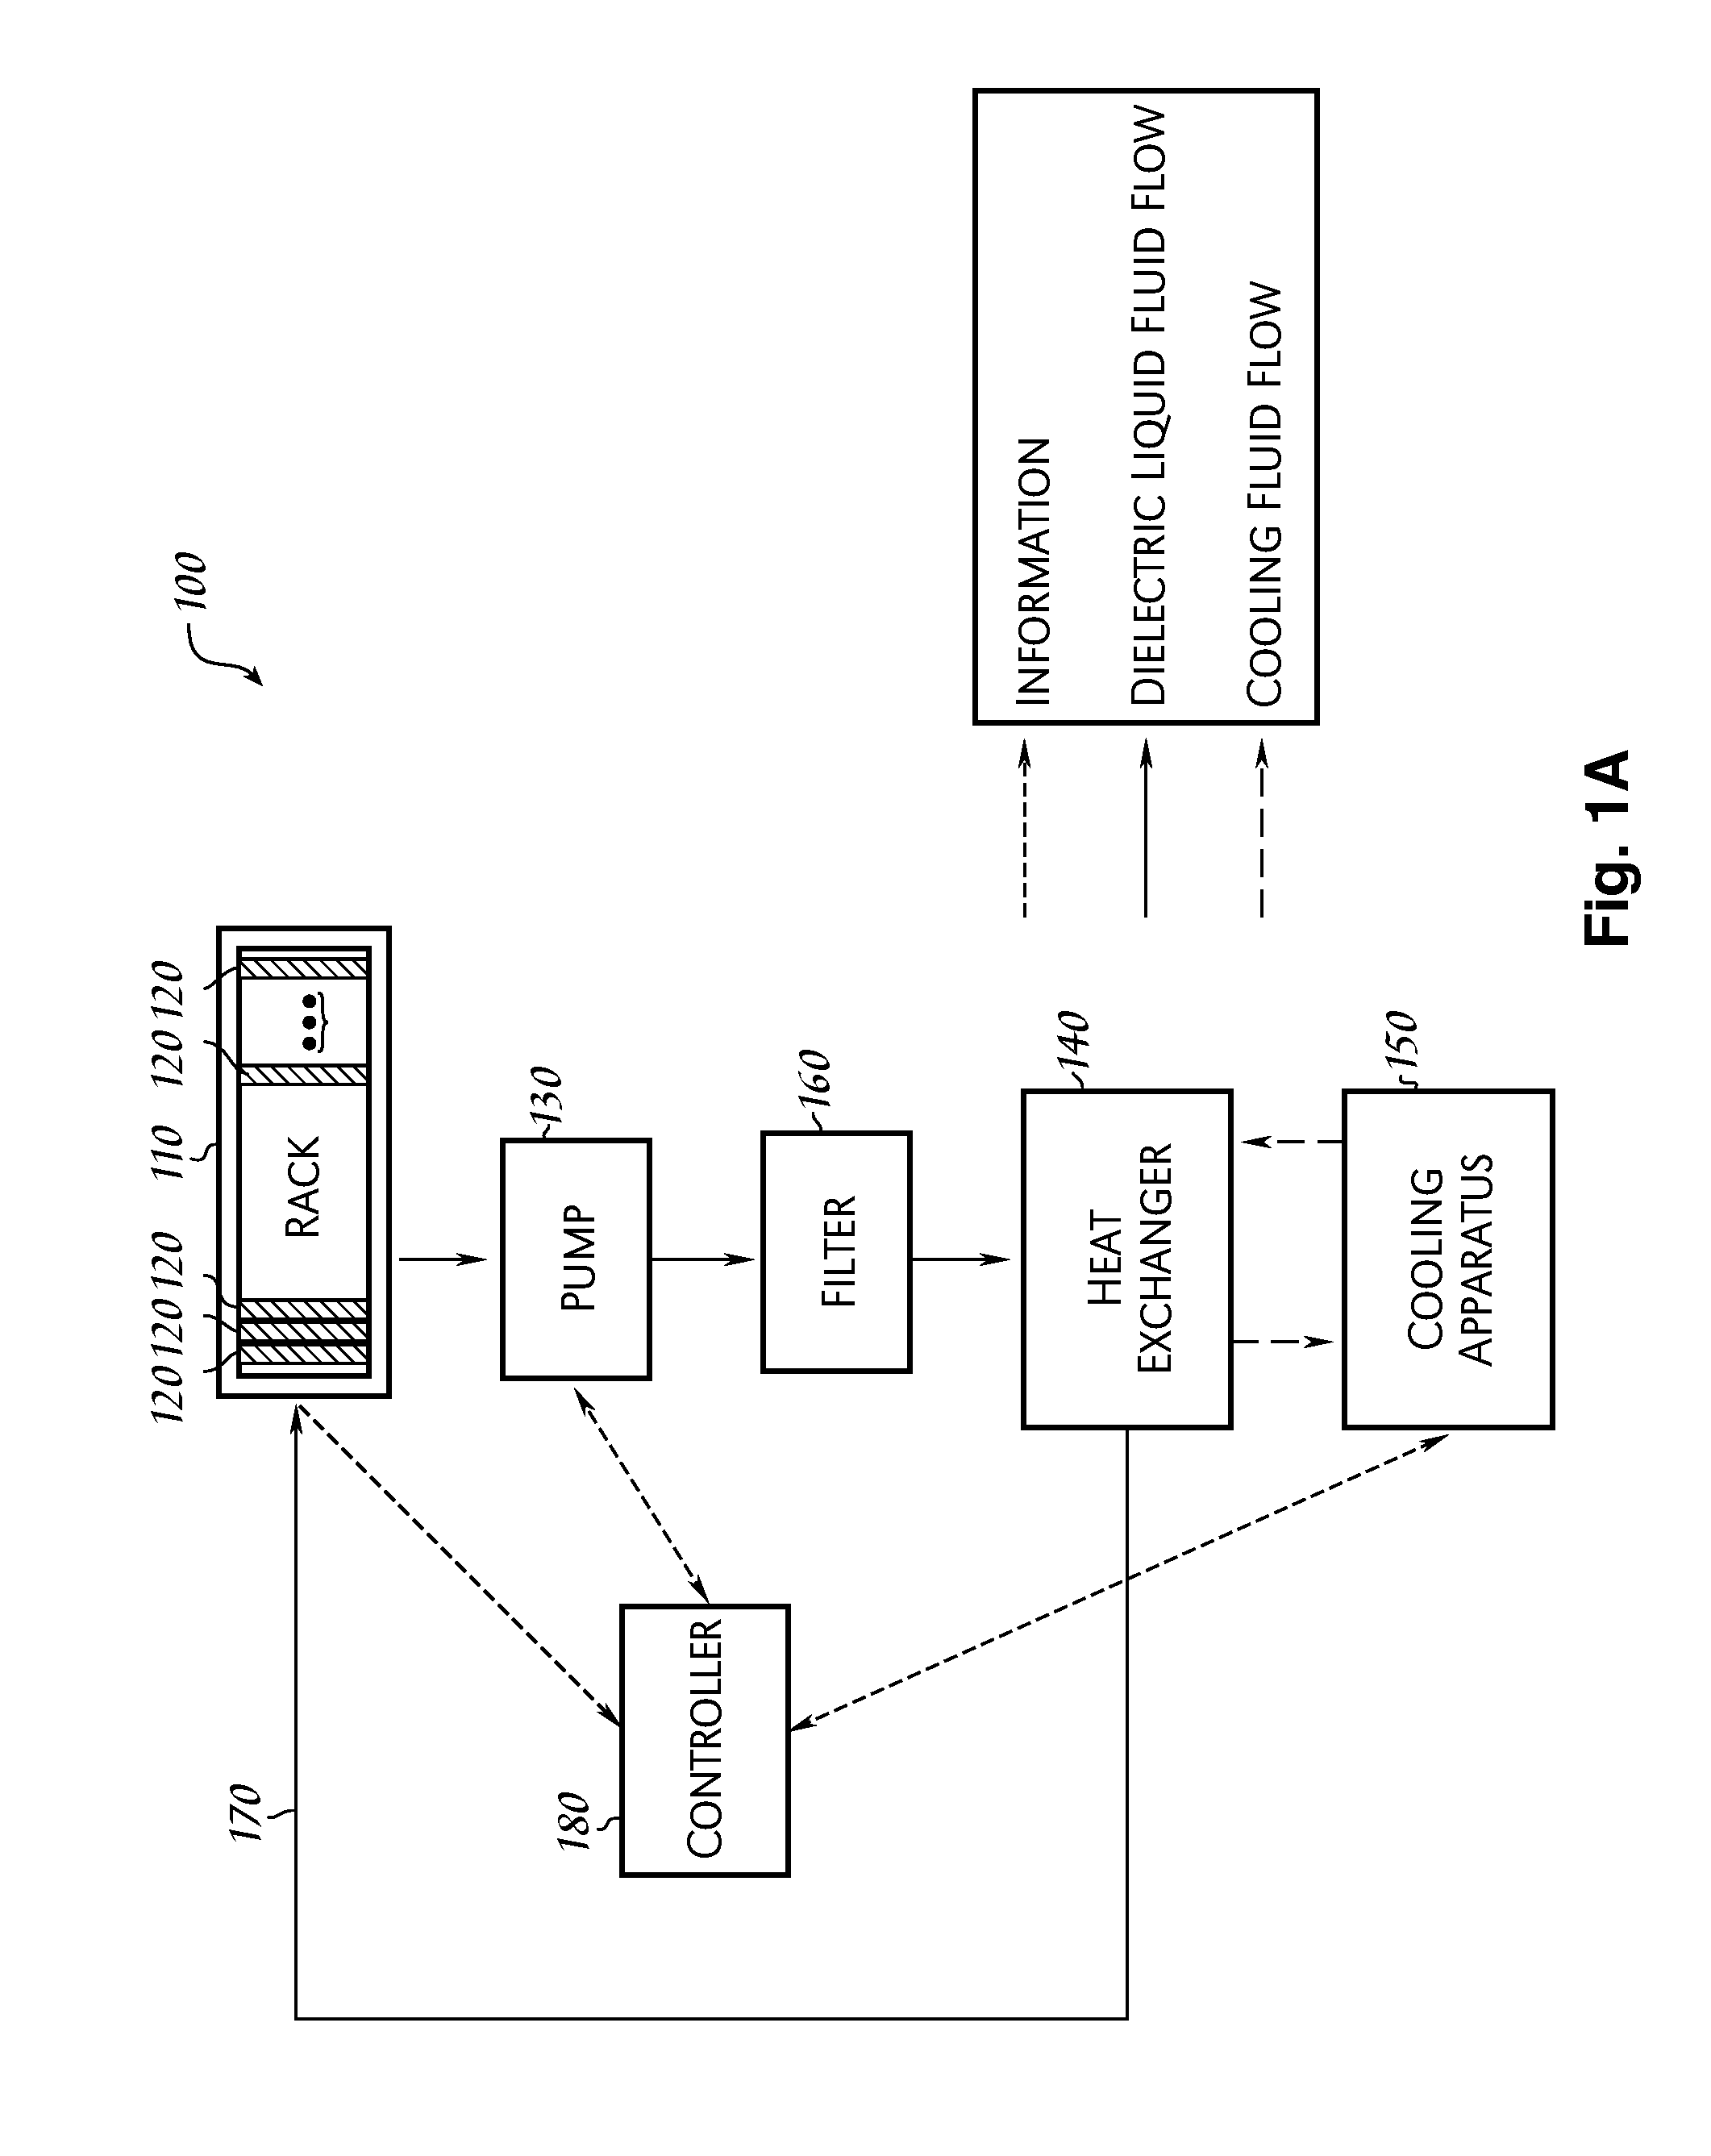 Liquid Submerged, Horizontal Computer Server Rack and Systems and Method of Cooling such a Server Rack